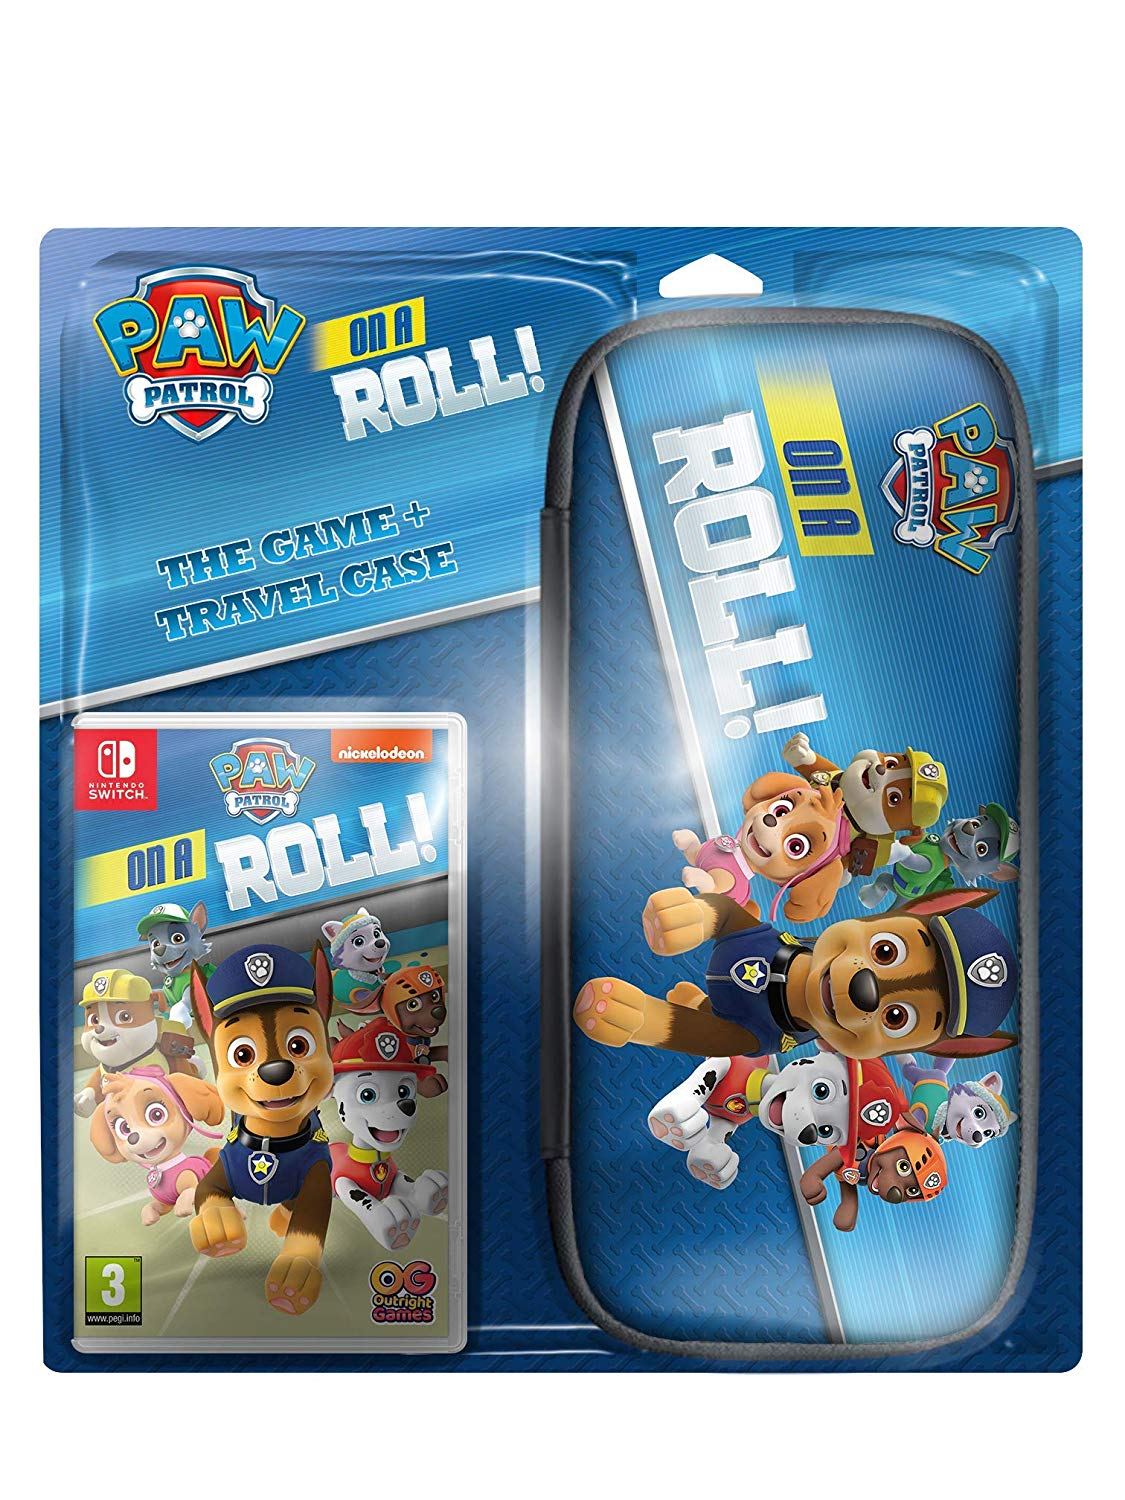 Paw Patrol: On A Roll + Travel Case for Nintendo Switch